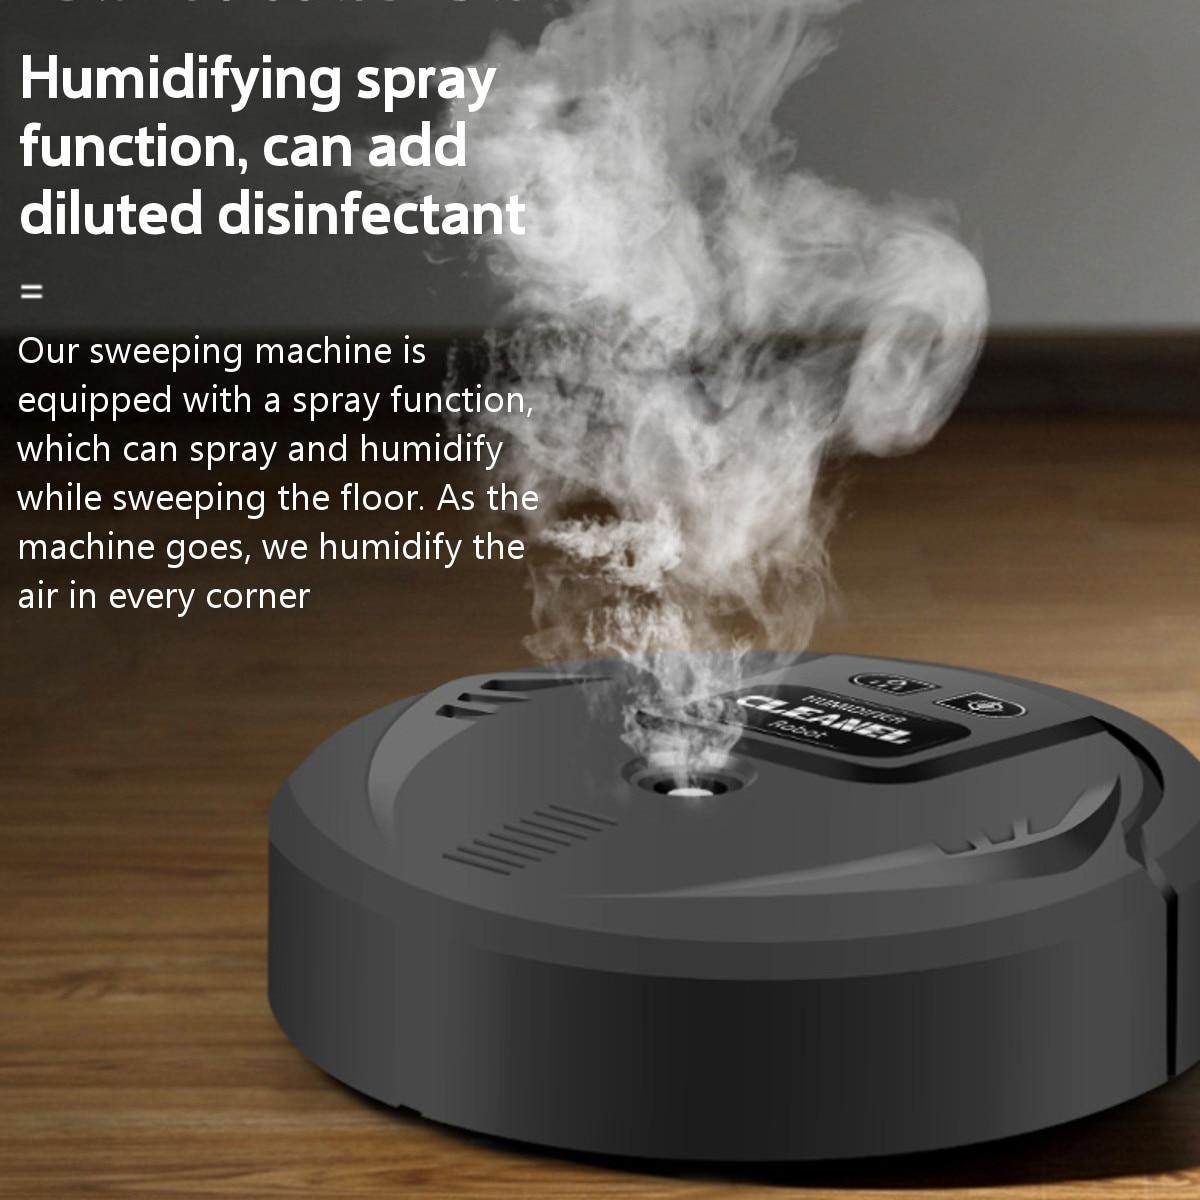 Fully Automatic Multifunctional Smart Robot Cleaner USB Charging Sweeping Robot Dry and Wet Spray Mop Spray Aerosol Disinfecting